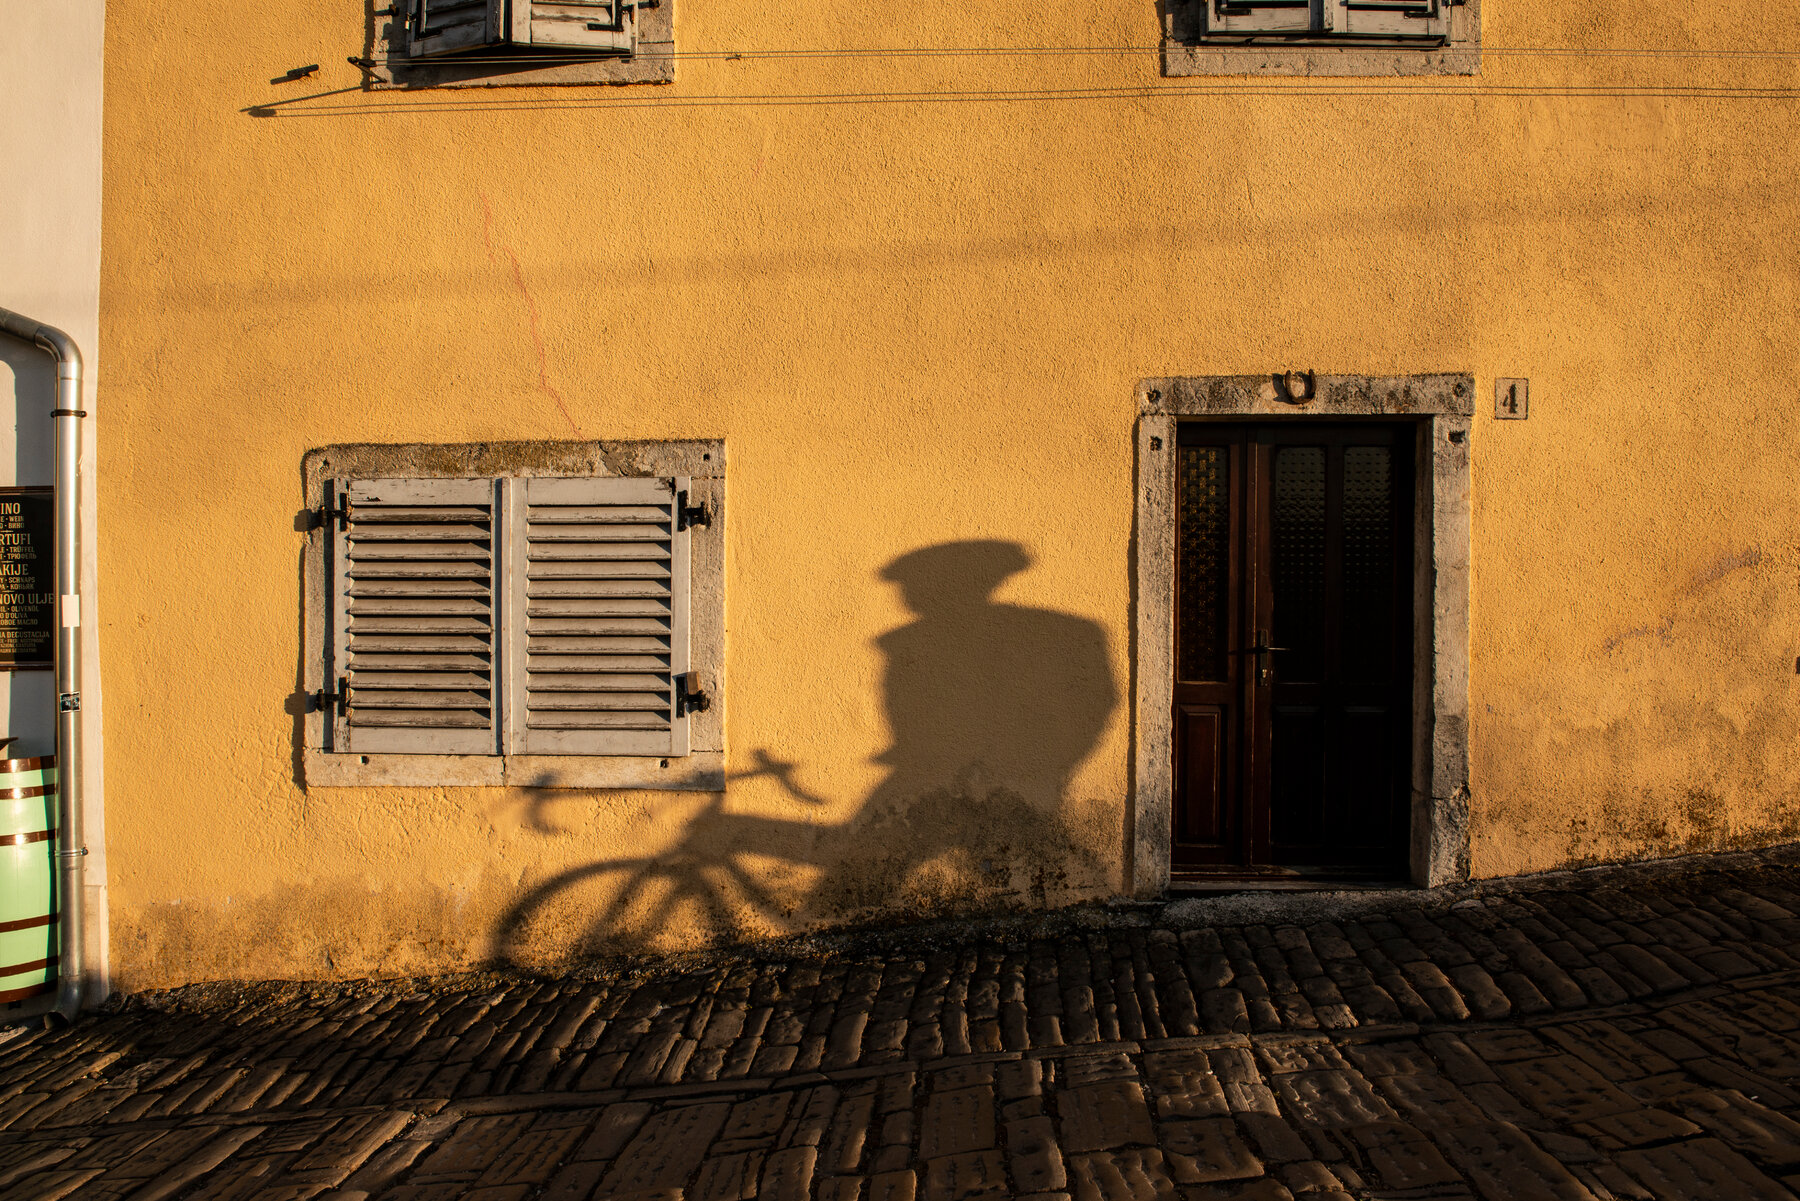 A shadow of a person and a bicycle over a wall.